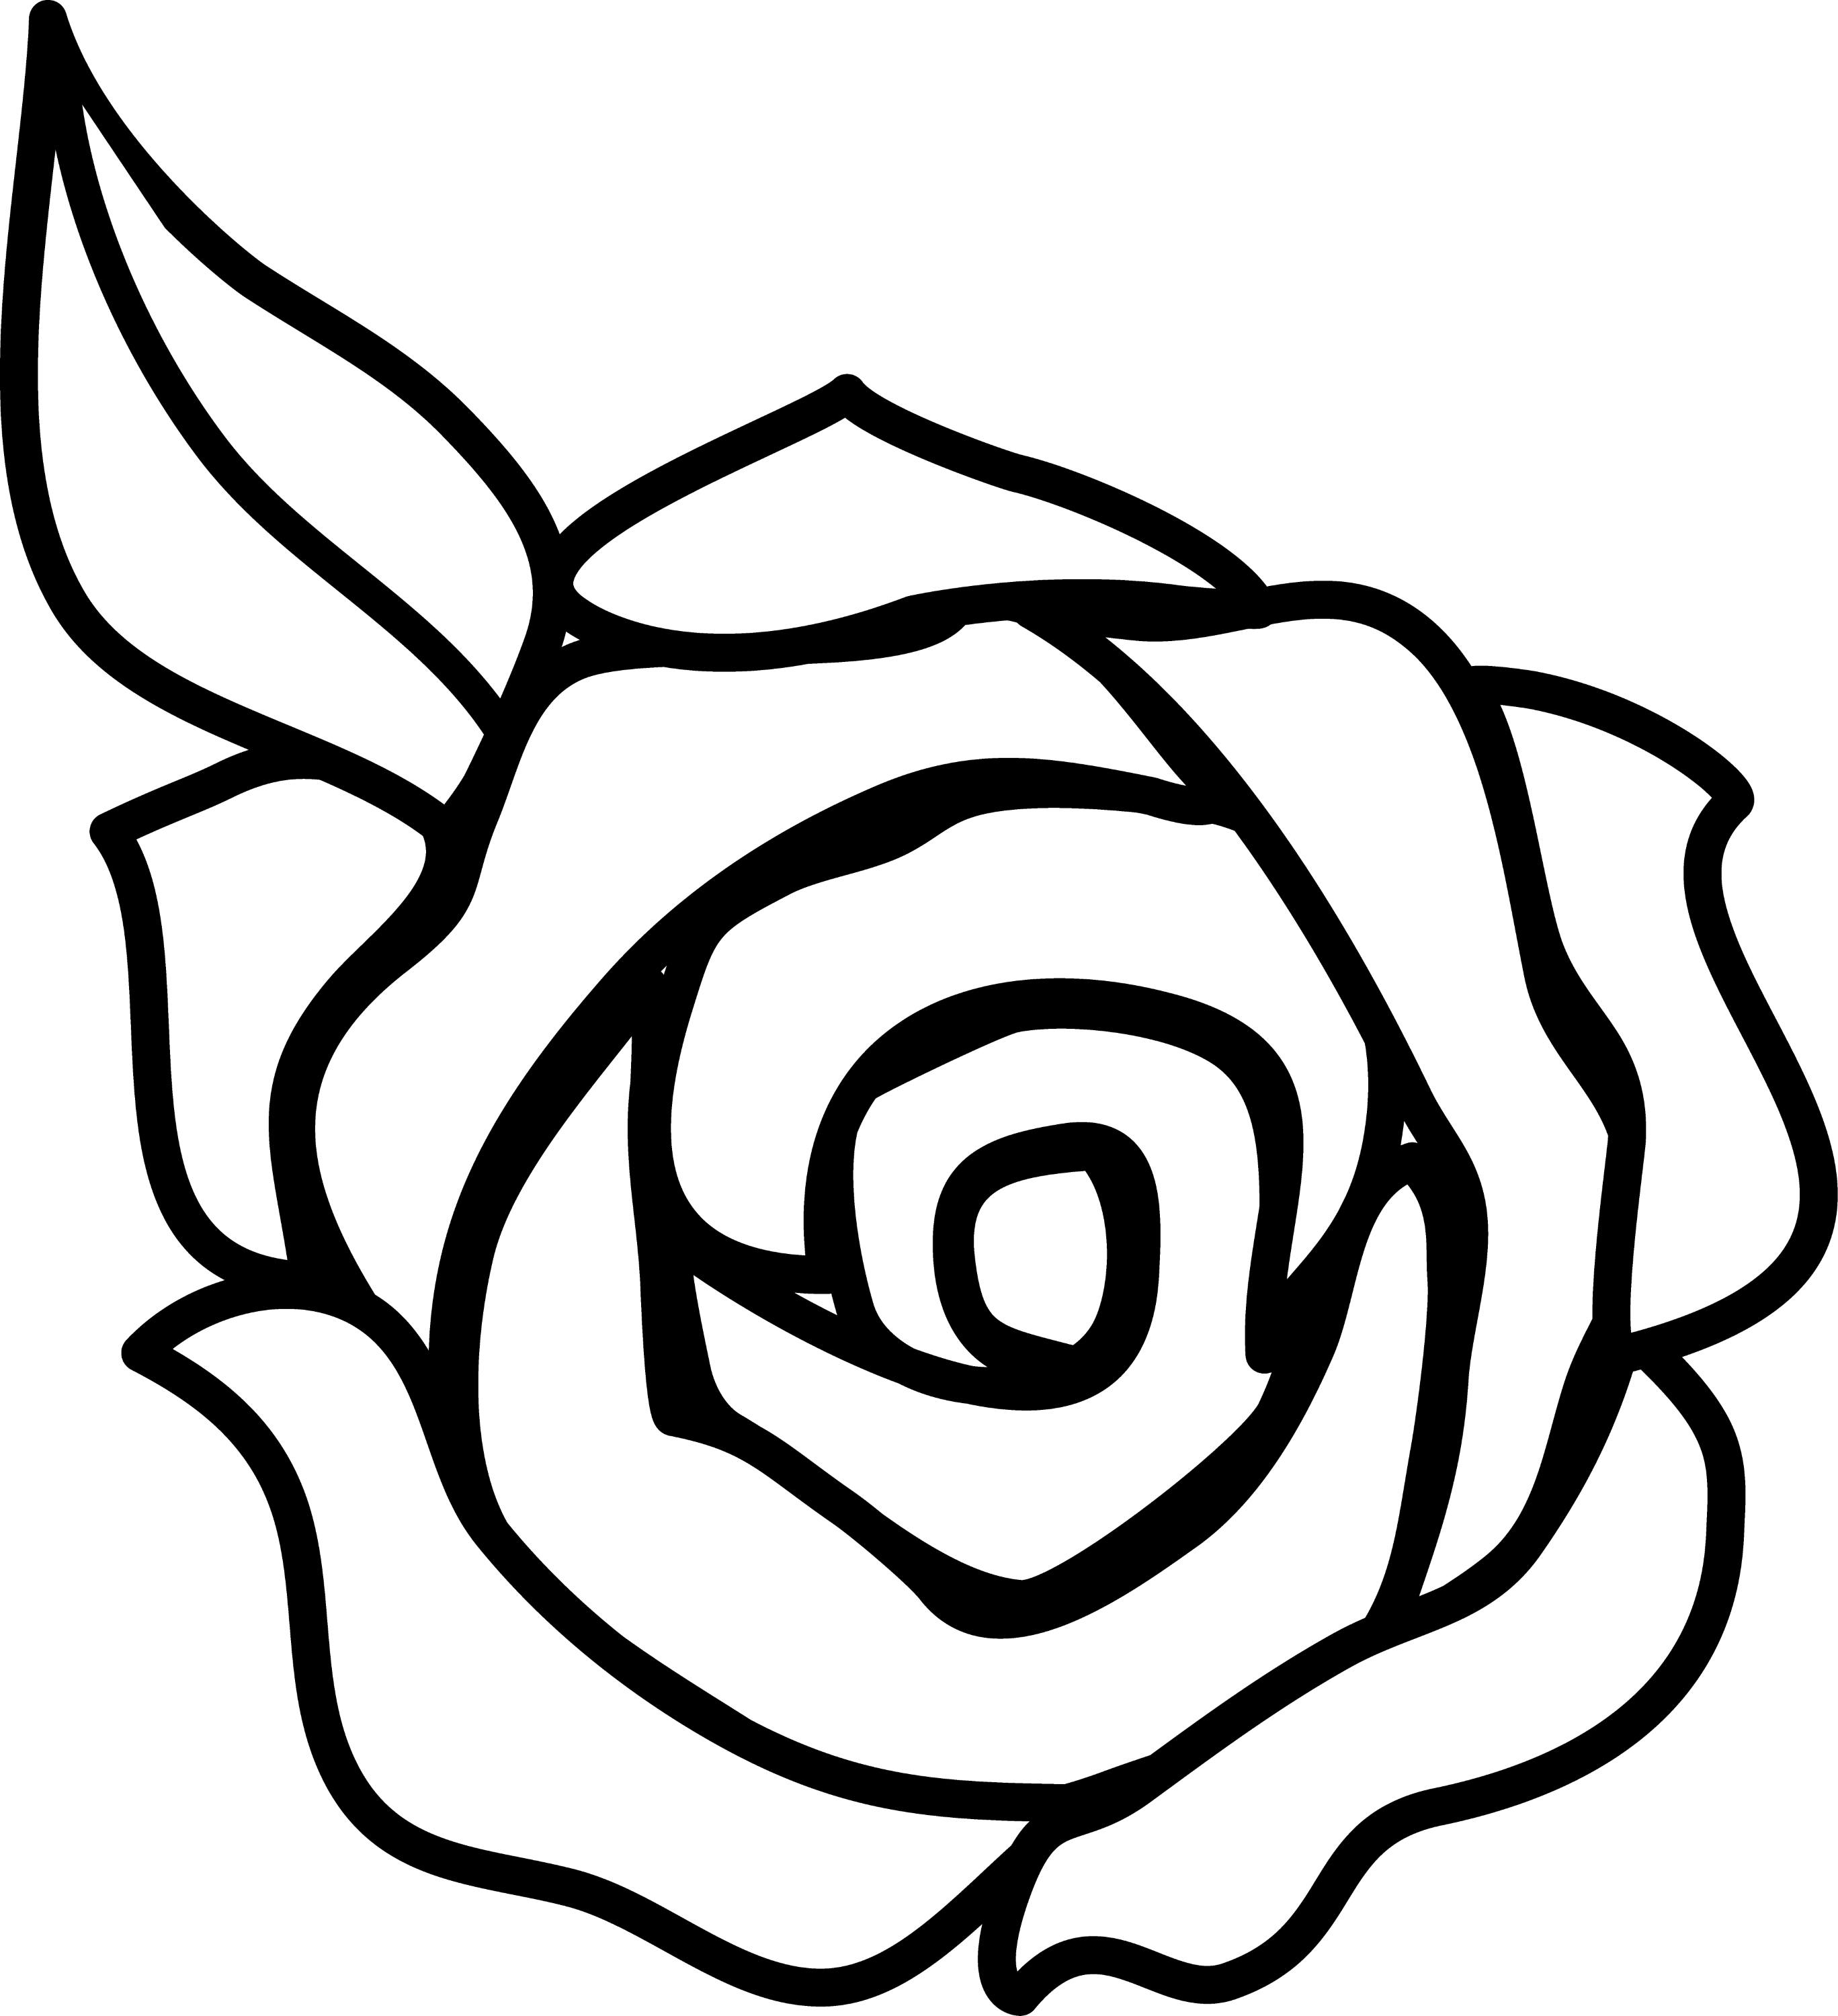 Rose Outline Drawing Realistic Sketch